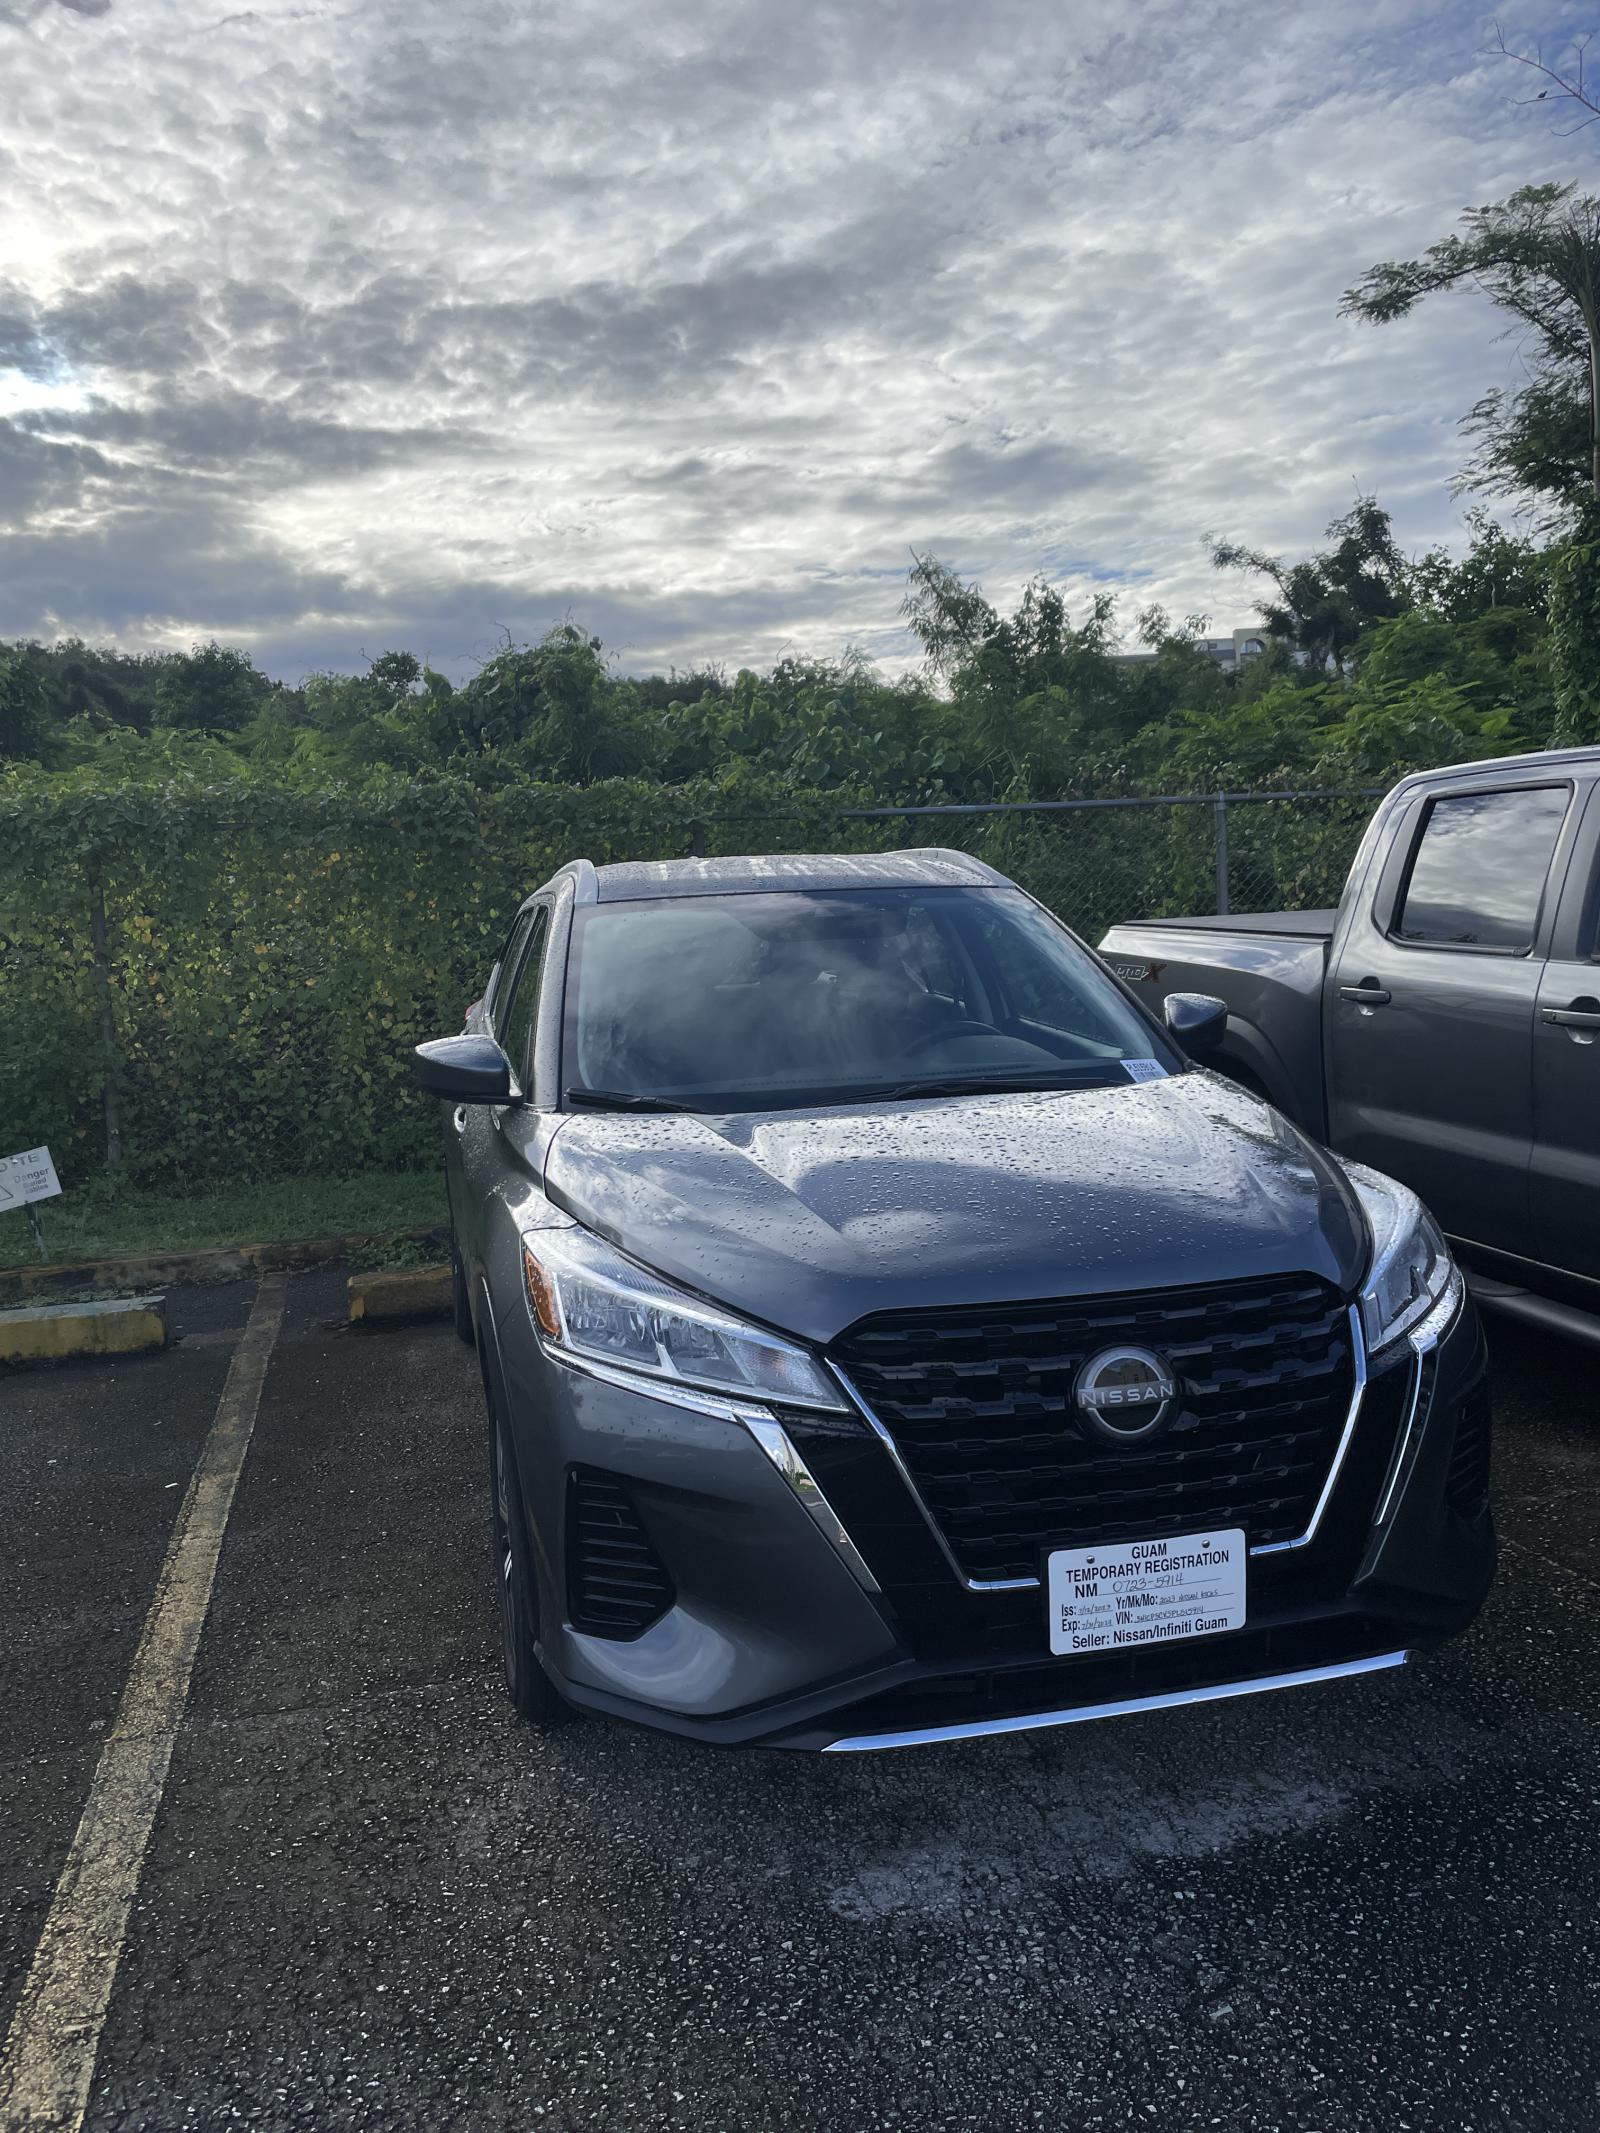 I rented a room because I thought it would be difficult to walk with my child in hot weather. I am very satisfied. Driving was easier than in Korea and Jeju Island, and parking was plentiful everywhere. I had a great time riding in Guam.